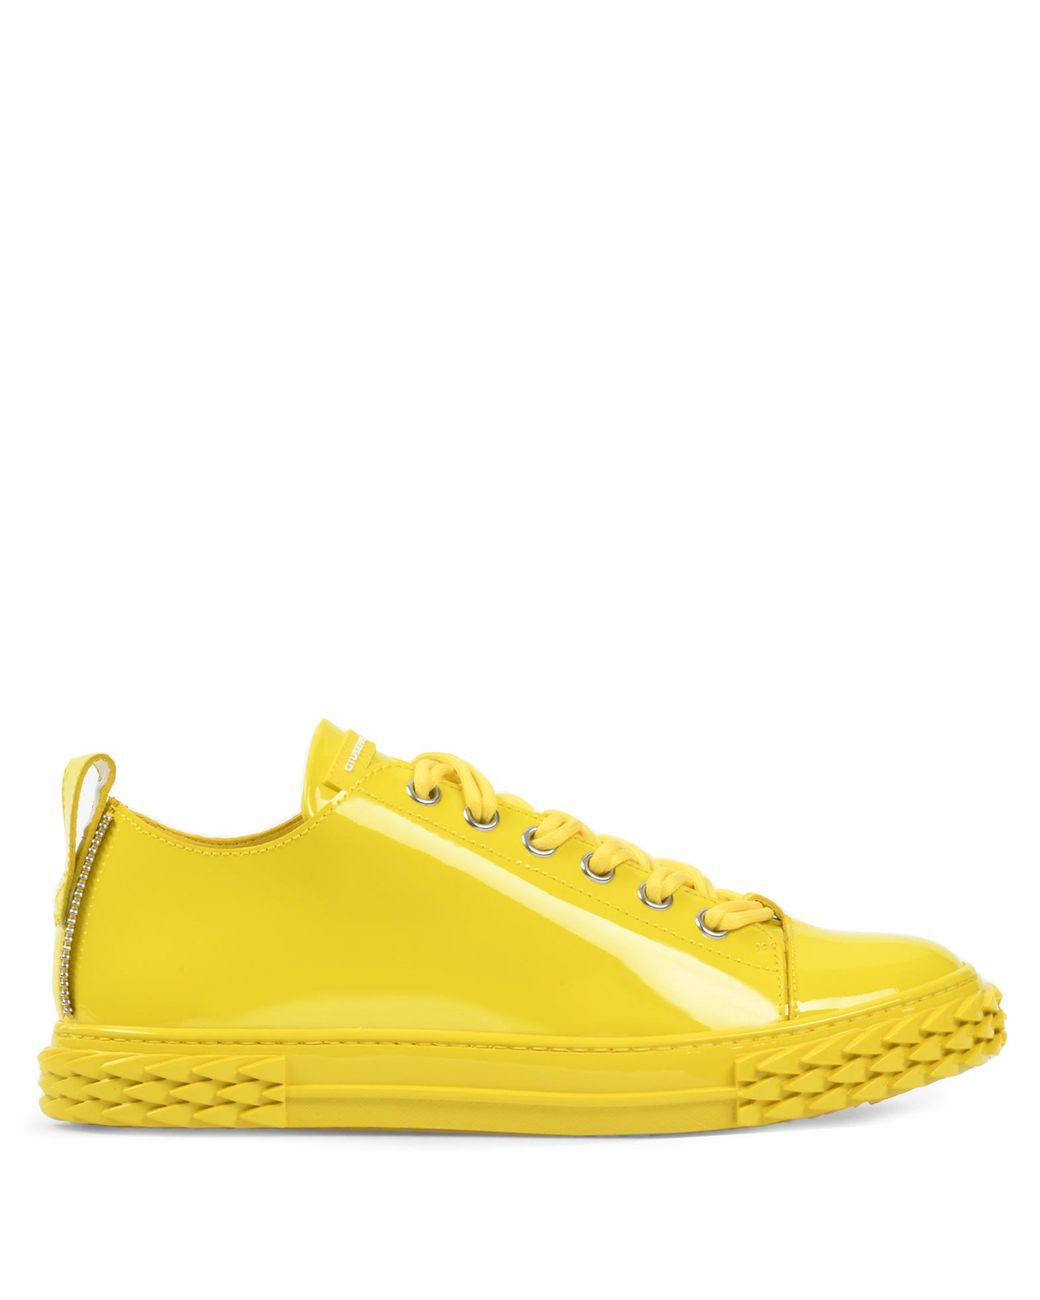 Giuseppe Zanotti Leather Blabber Sneakers in Yellow for Men - Save 40% ...